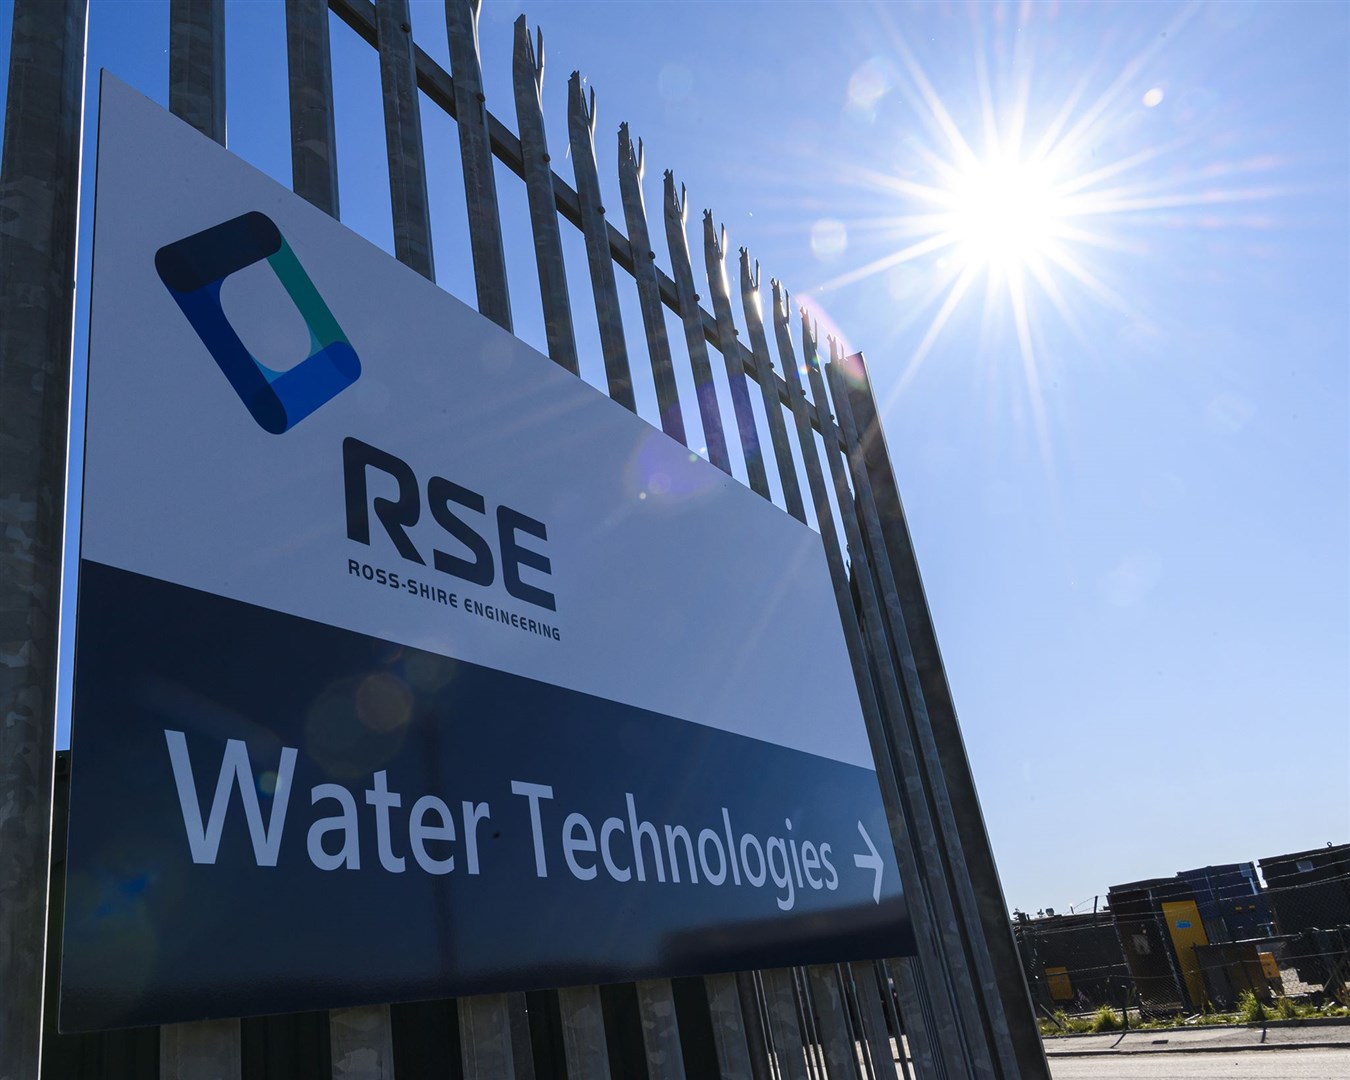 Ross-shire Engineering has announced the acquisition of another firm. Picture: Alan Cruickshank